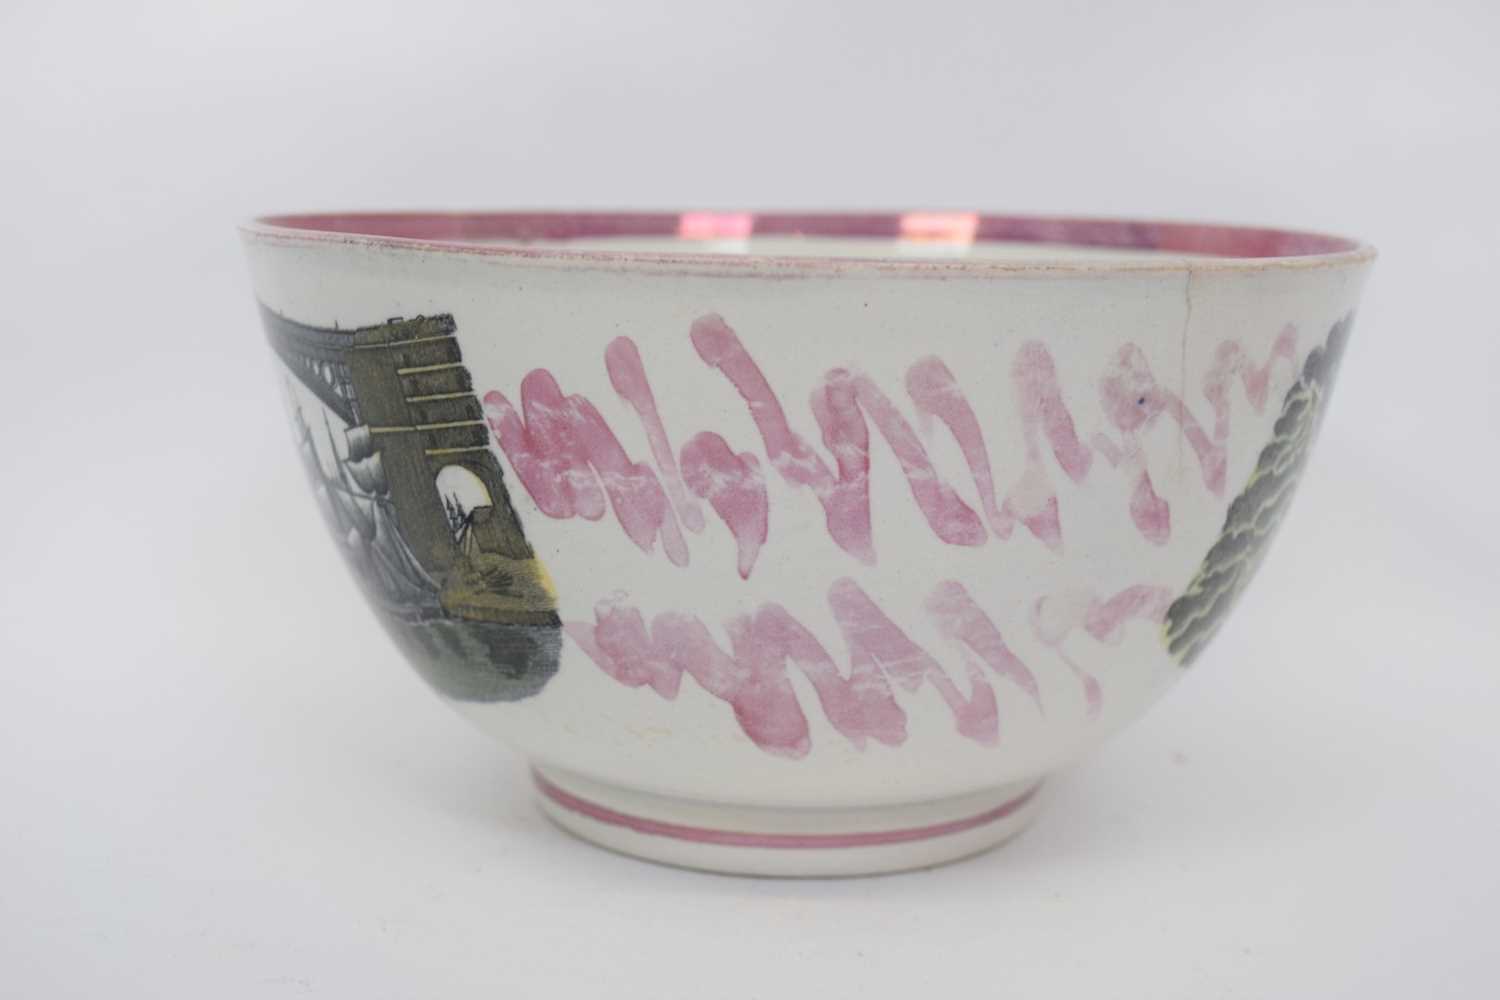 Sunderland lustre bowl with a view of Sunderland Bridge and the Agamemnon in a storm verso, 19cm - Image 3 of 5